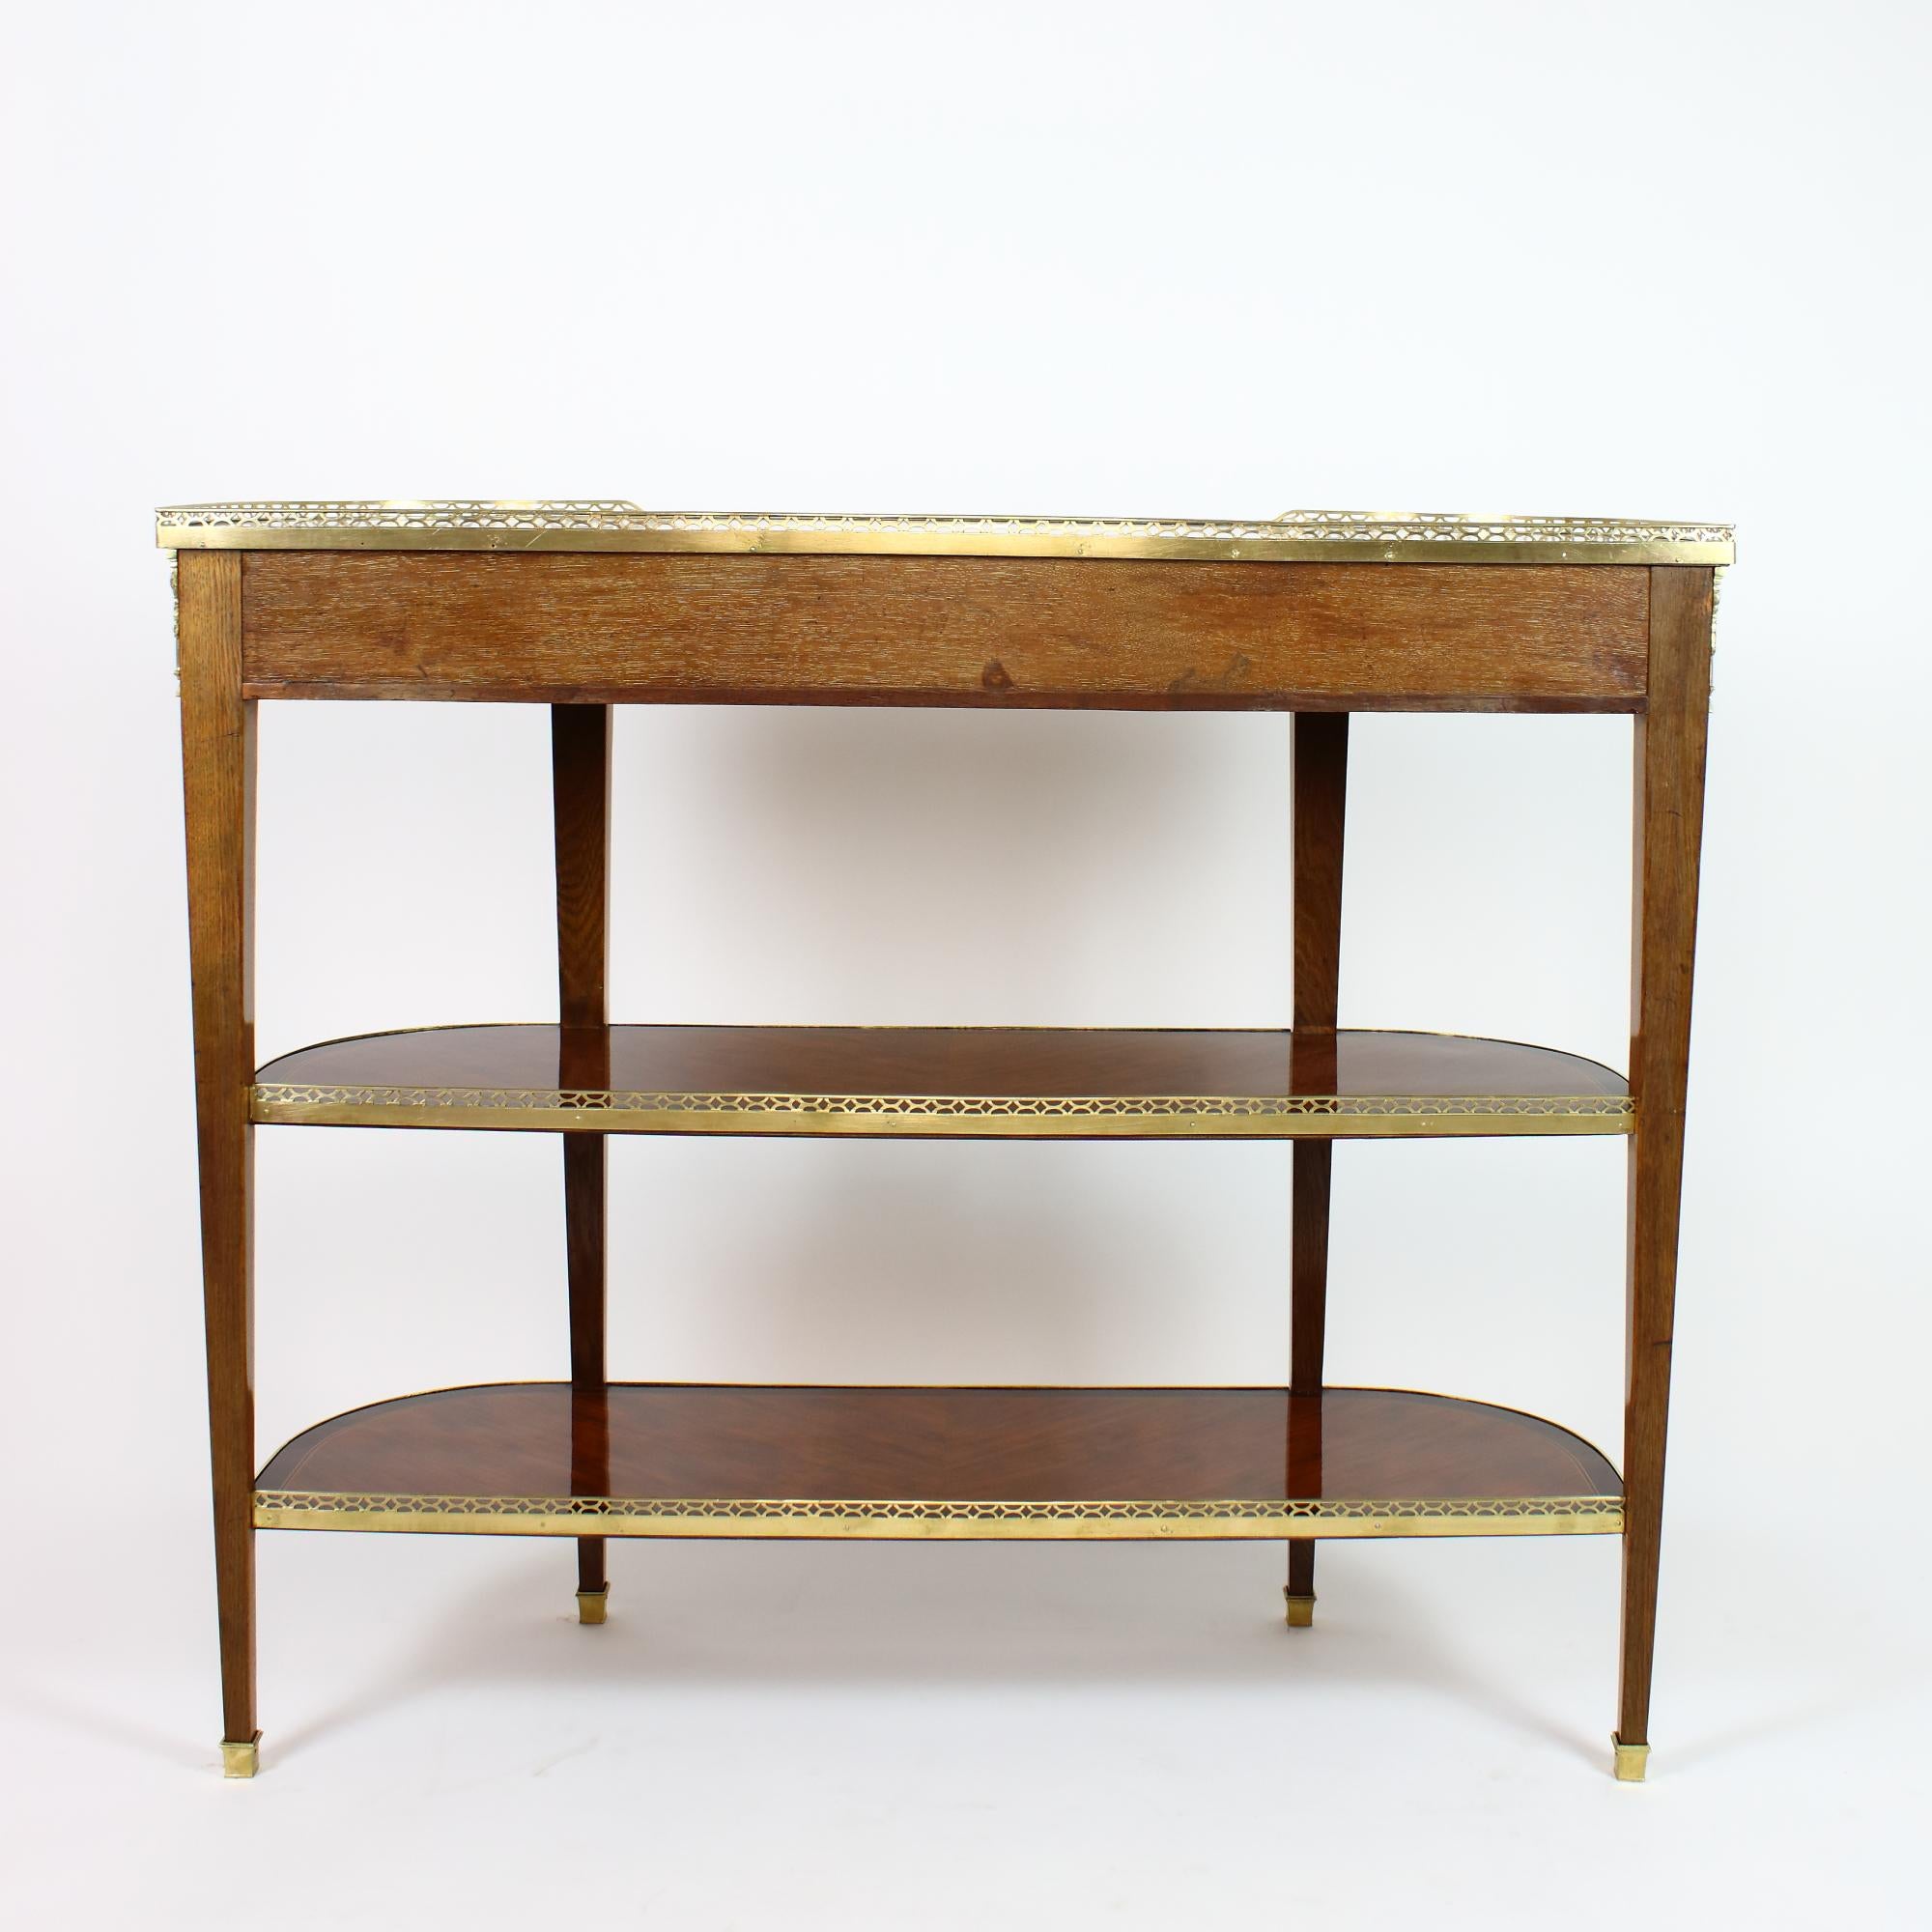 Gilt Late 18th Century French Louis XVI Marquetry Console Table or Desserte